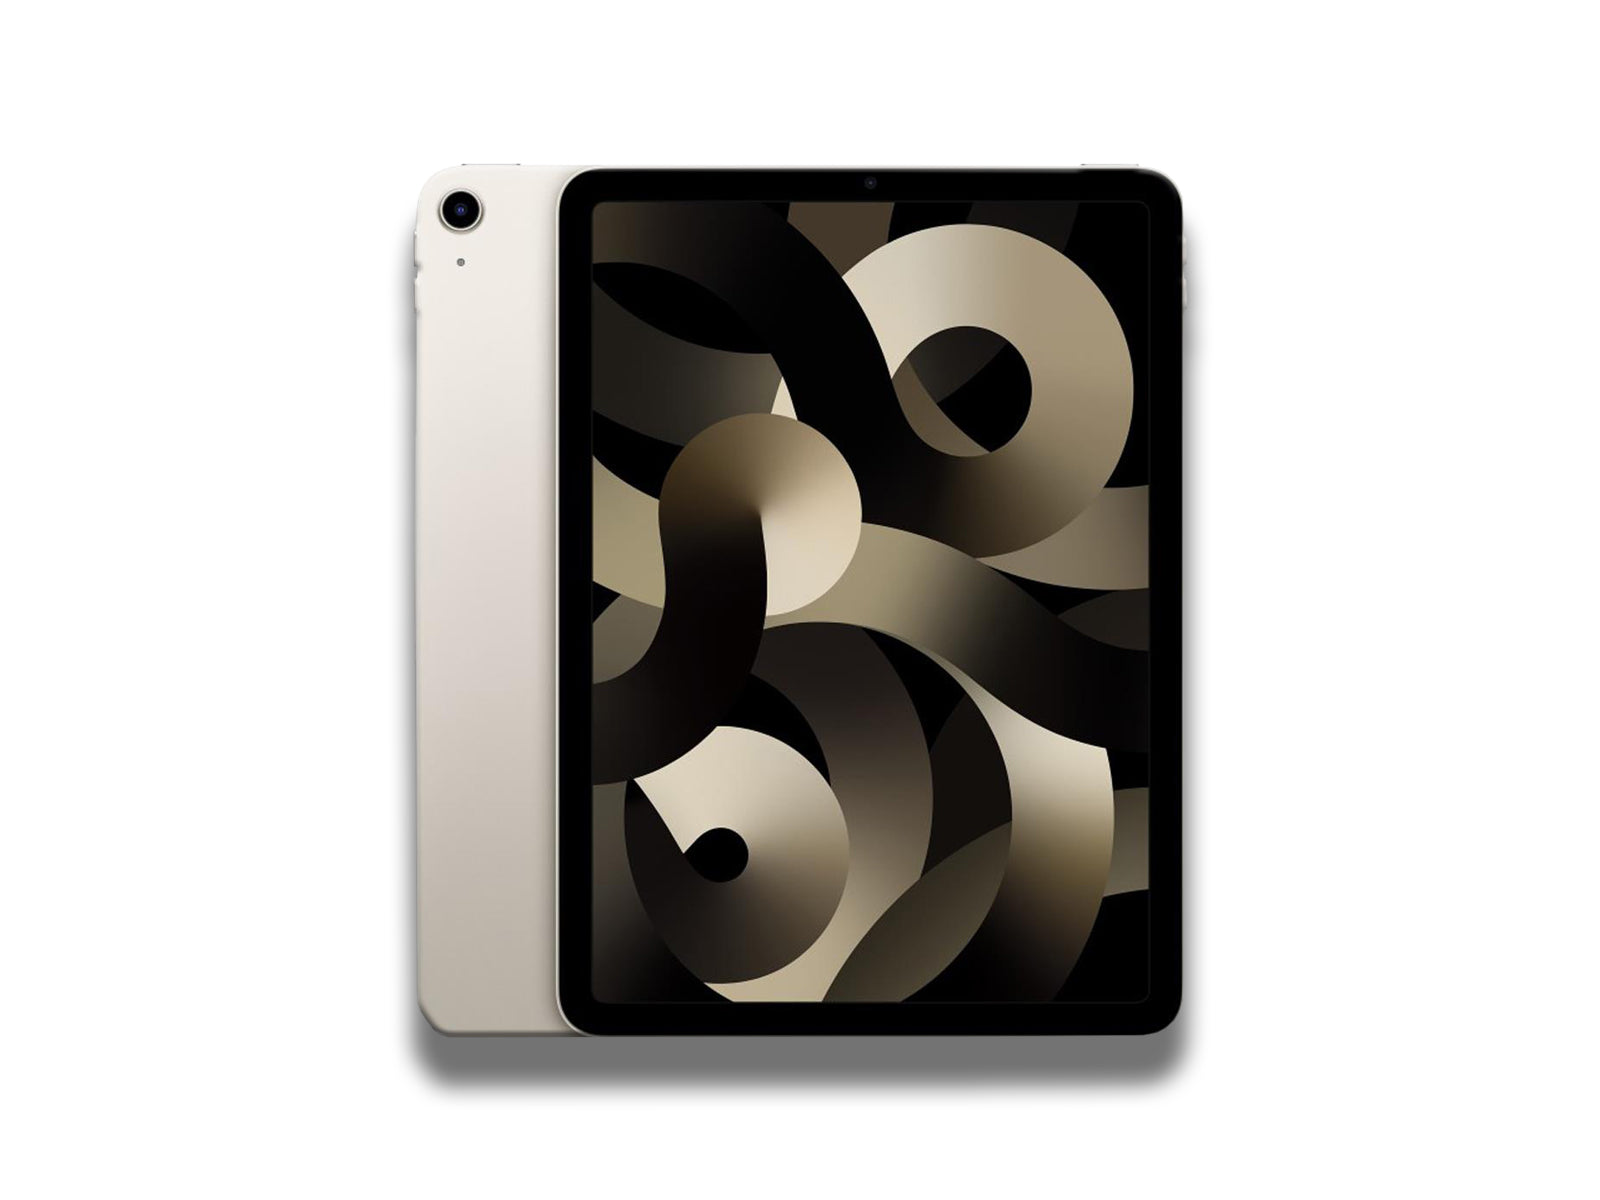 Apple iPad Air 5th Gen In Starlight Front And Back